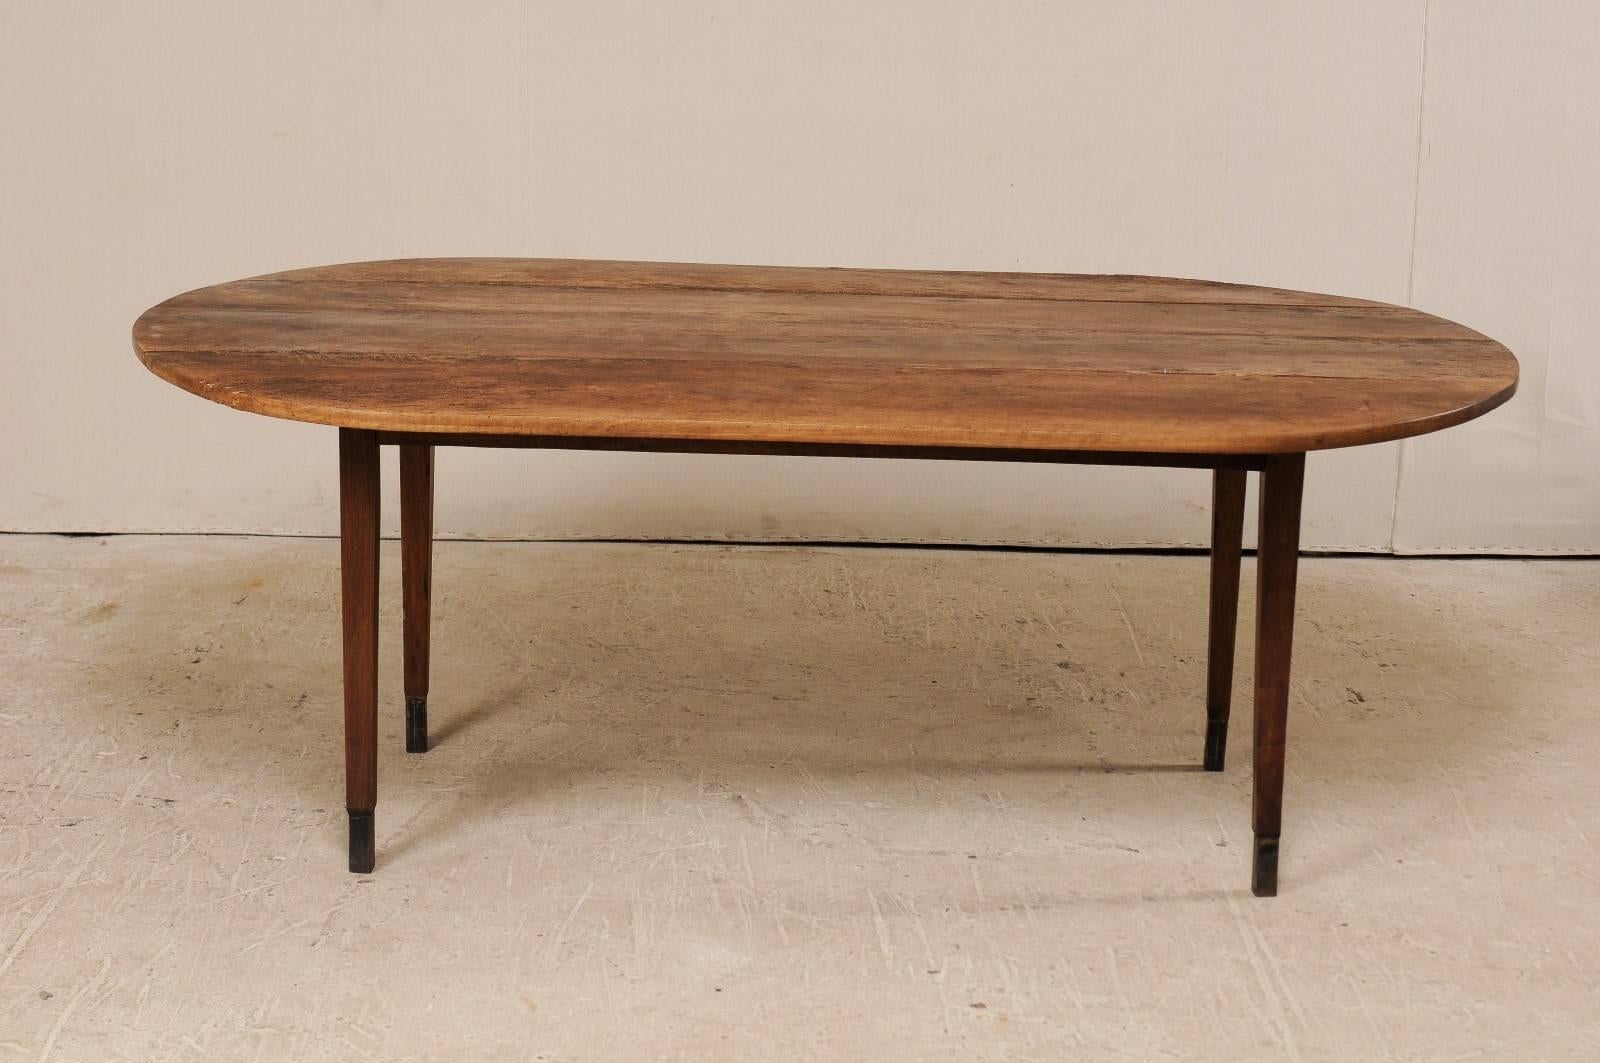 French Early 19th Century Drop-Leaf Dining Room Table with Elegant Oval Shape 4